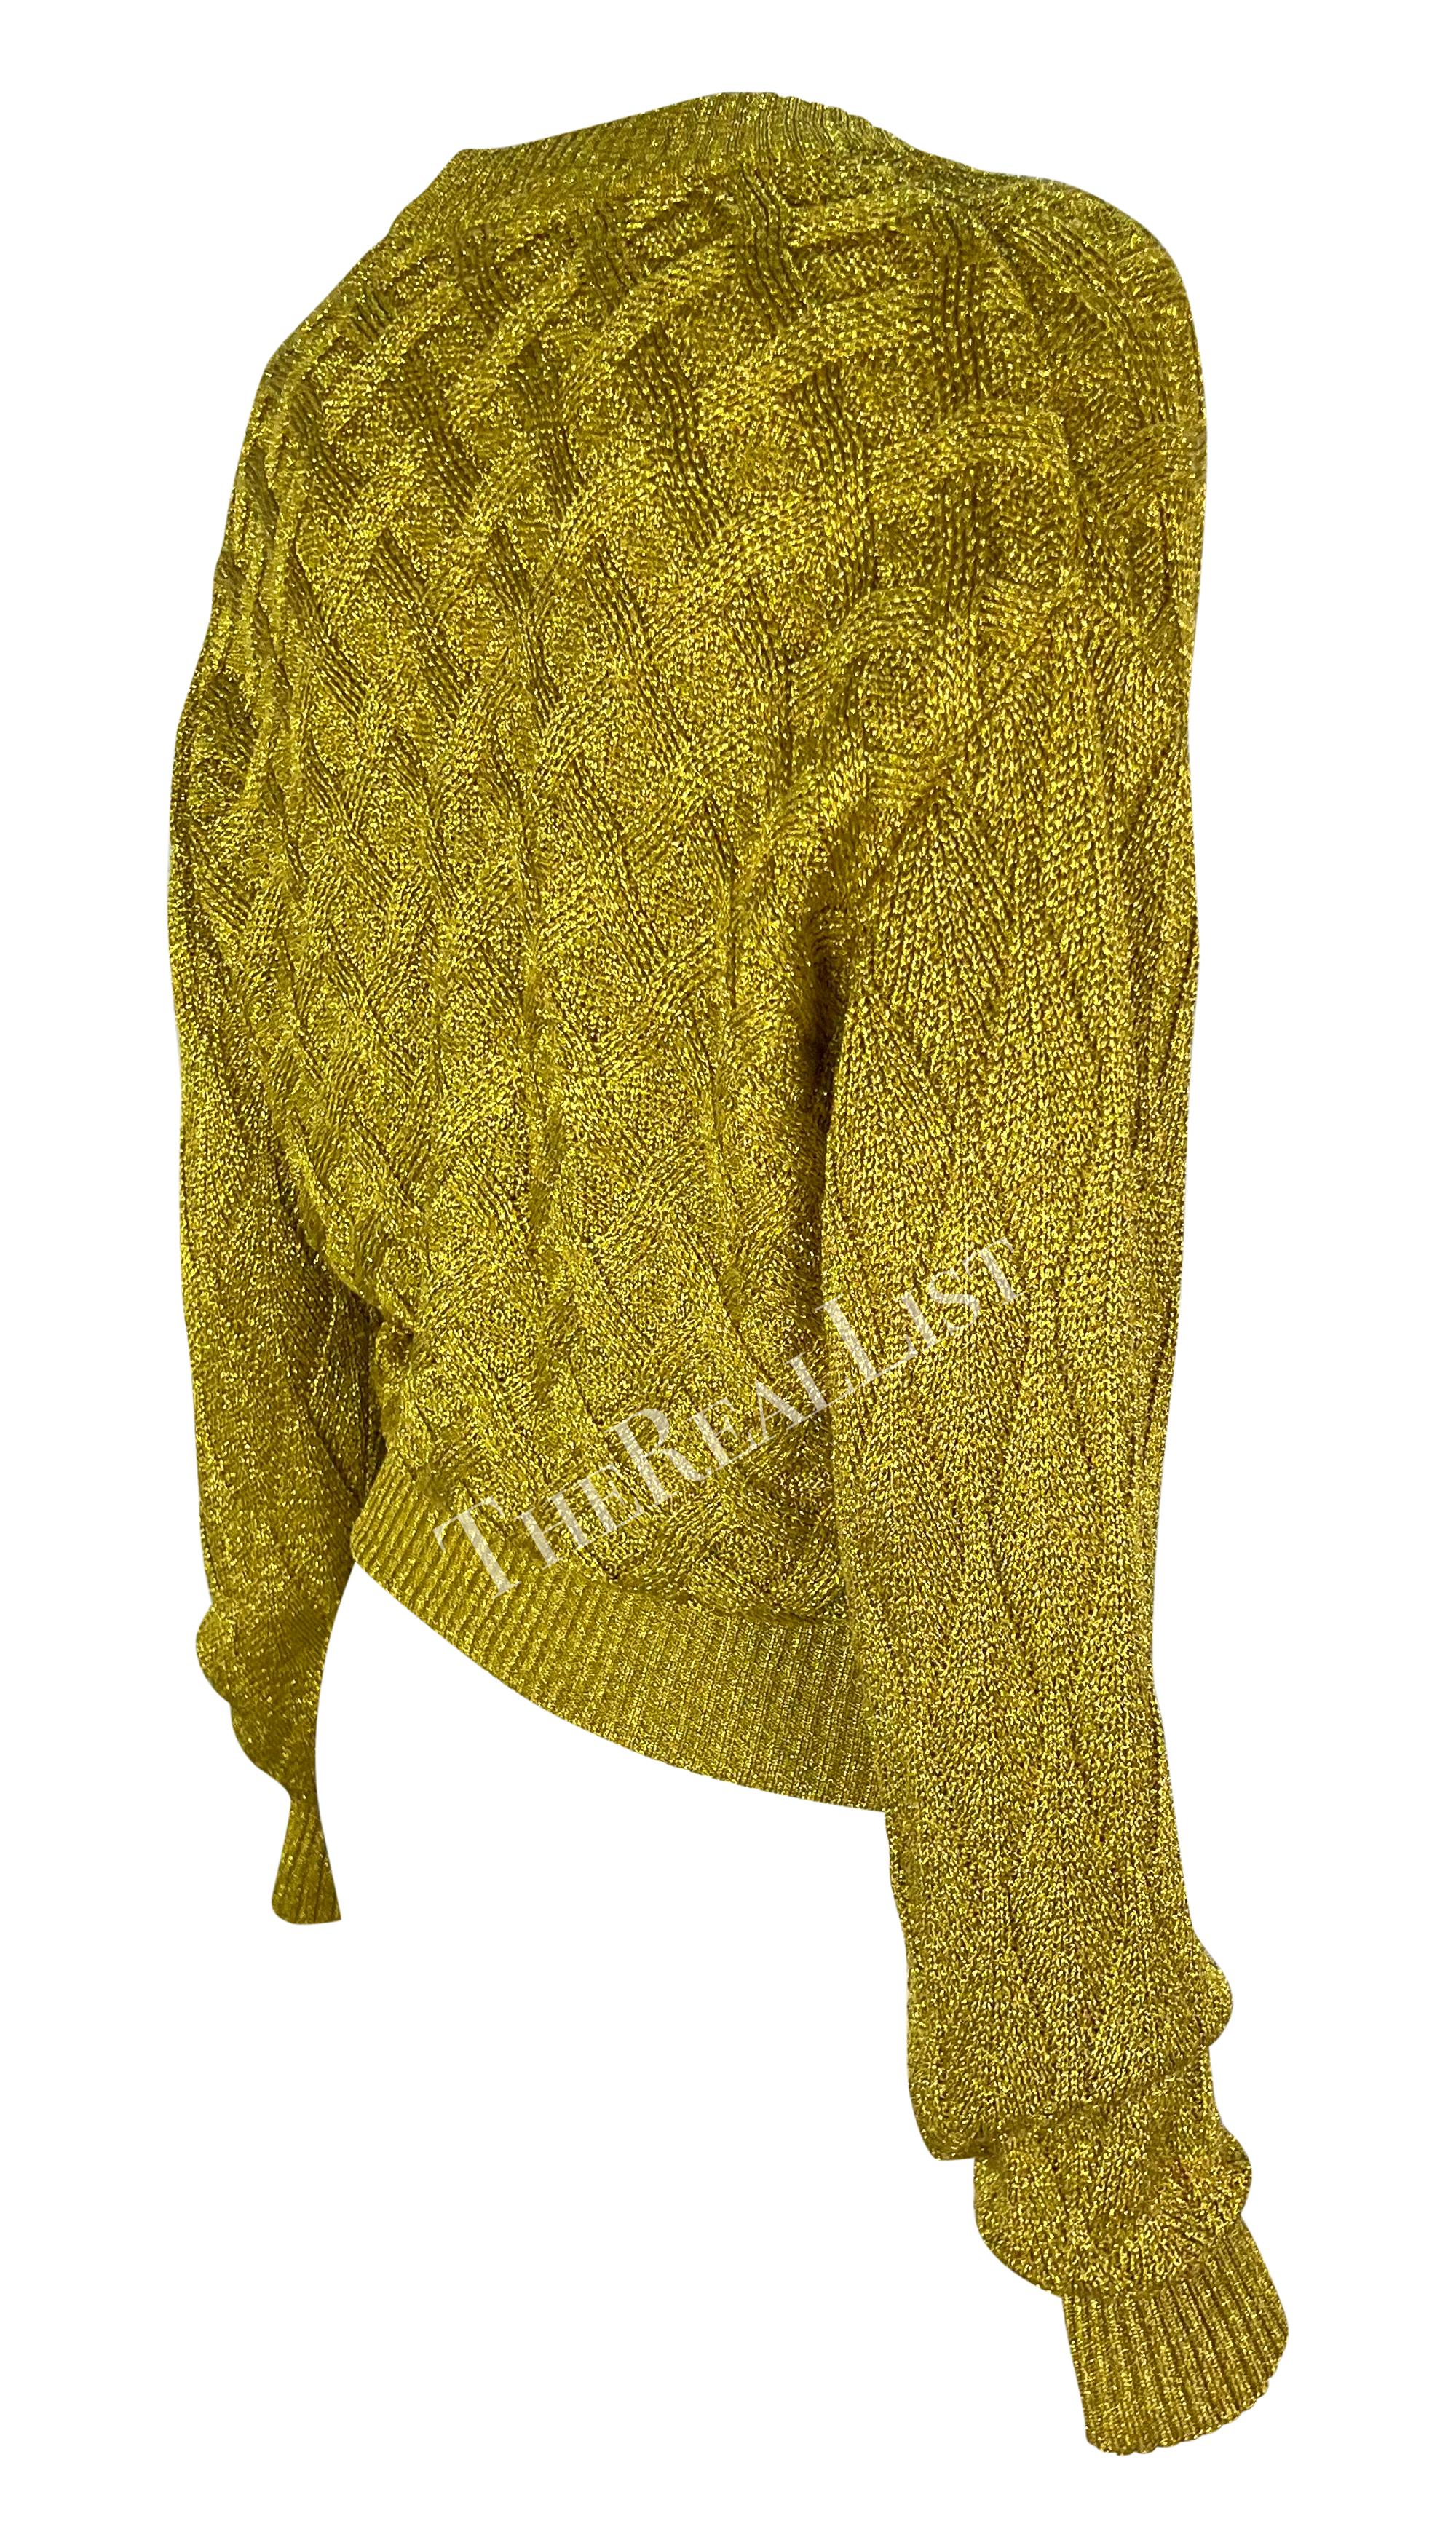 F/W 1992 Atelier Versace Gold Metallic Cable Knit Cardigan Sweater For Sale 2